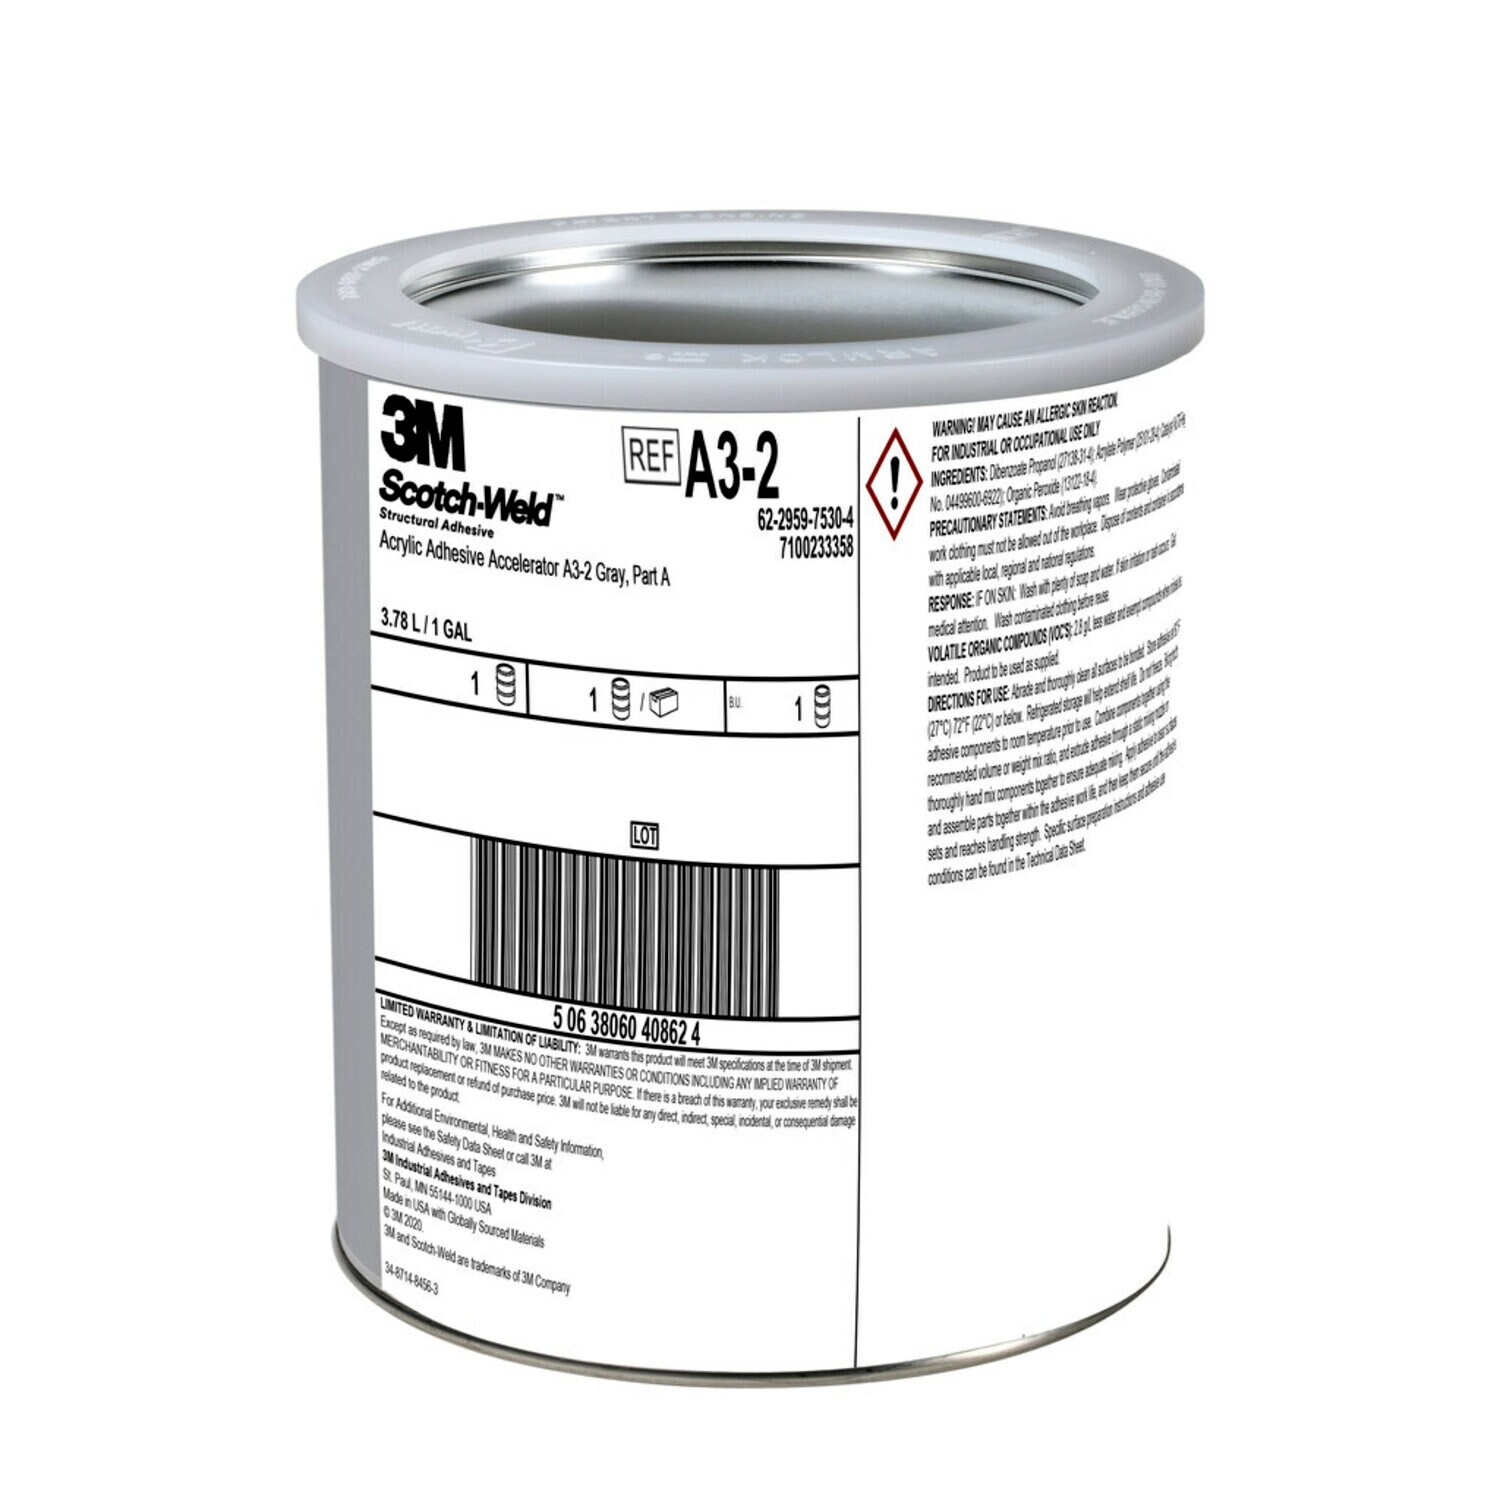 7100233358 - 3M Scotch-Weld Acrylic Adhesive Accelerator A3-2, Gray, Part A, 1
Gallon, 1 Can/Case